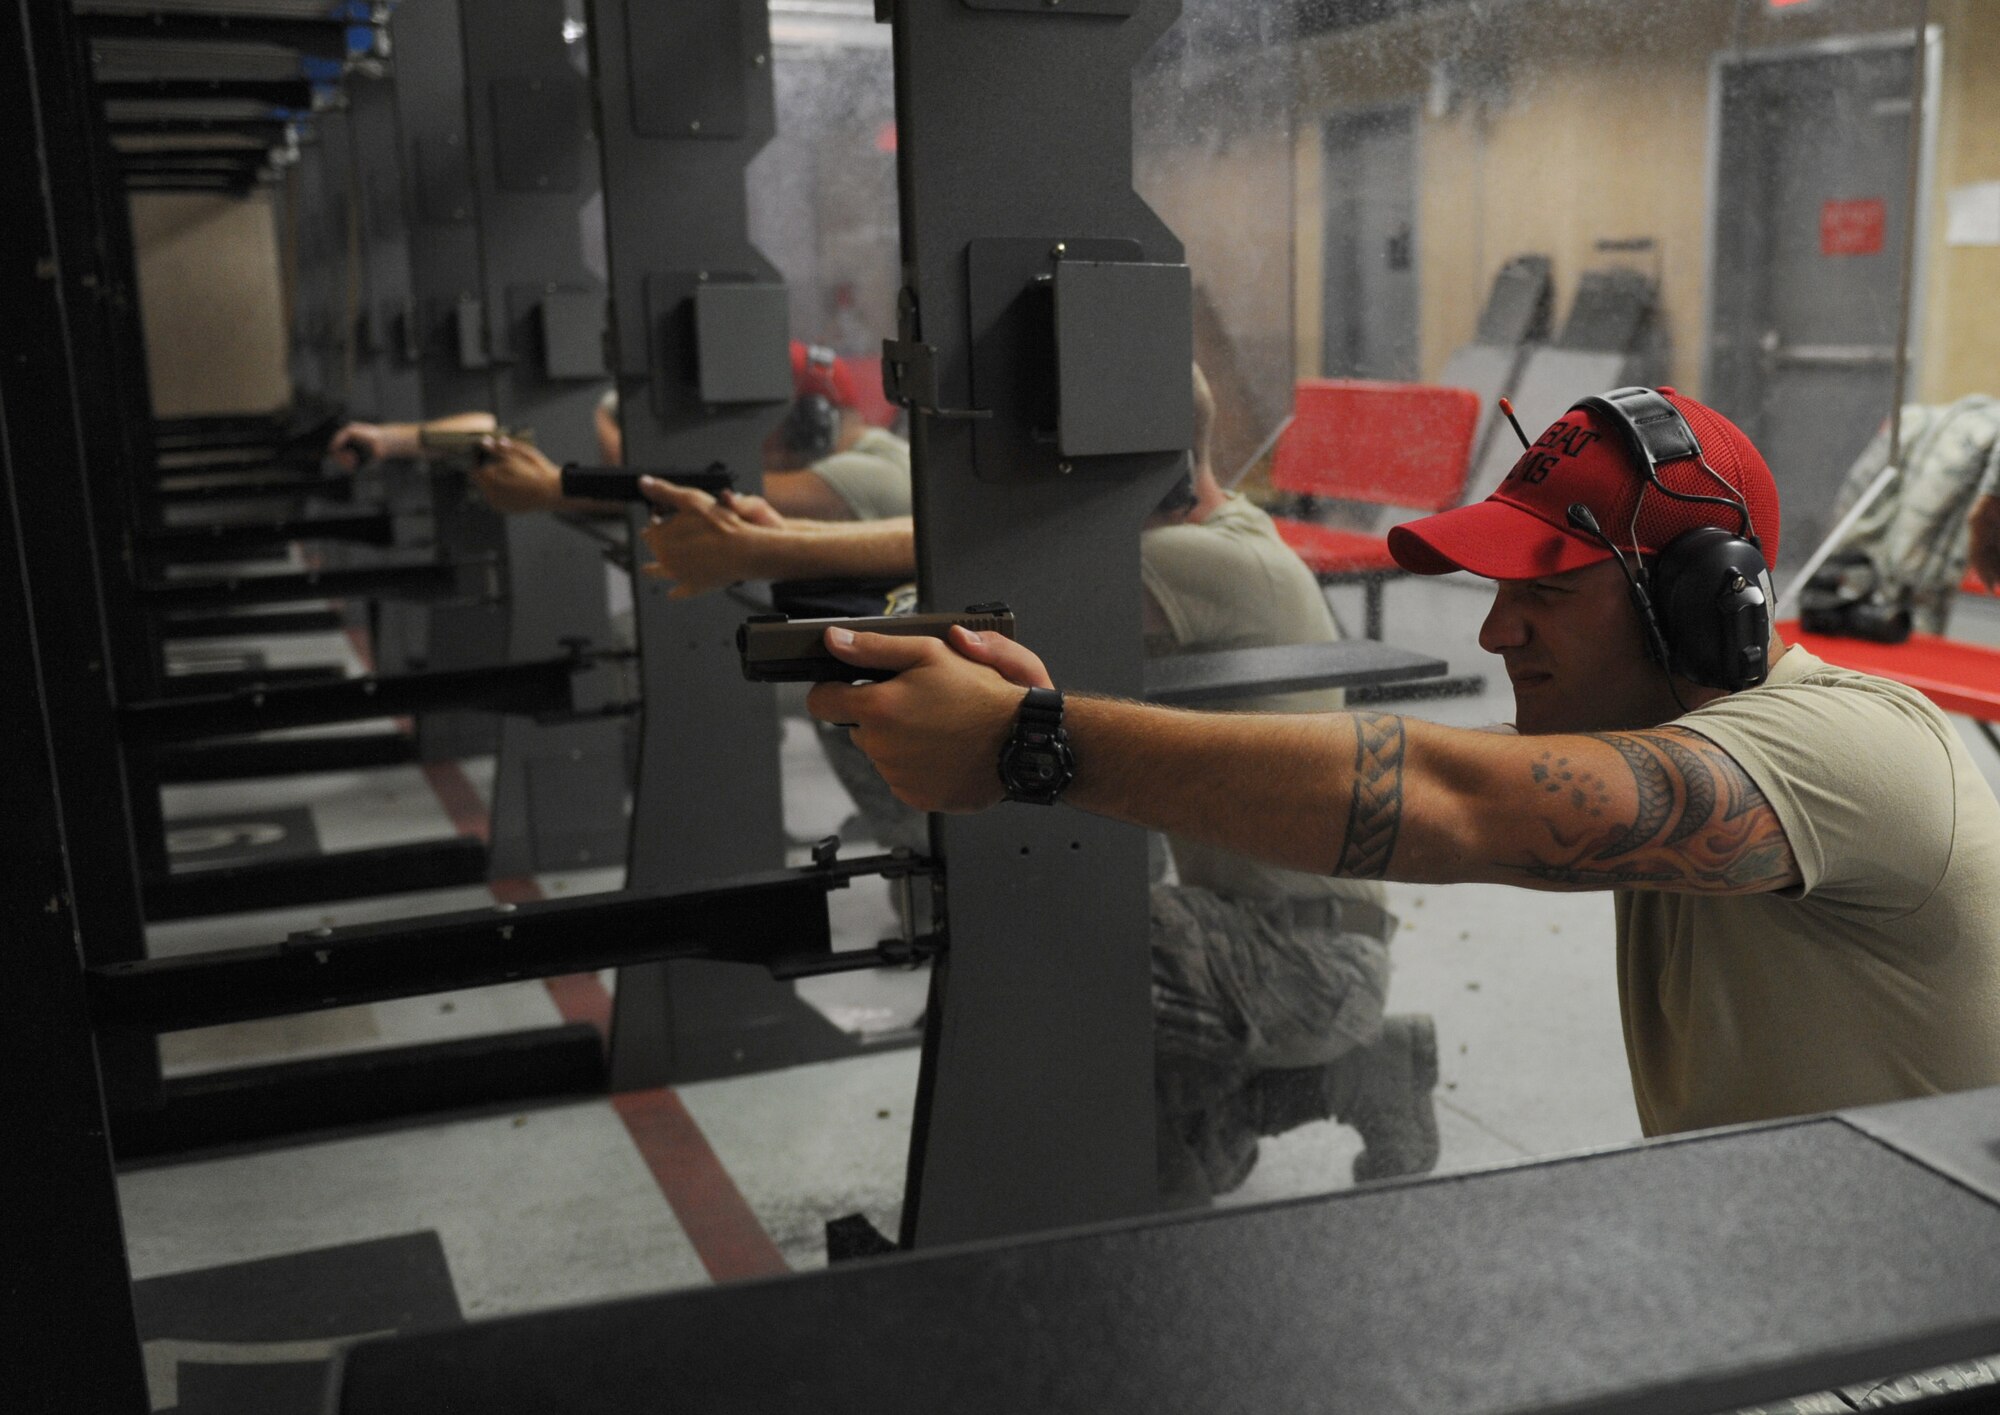 Staff Sgt. Jeffrey Tuscany, 81st Security Forces Squadron combat arms instructor, fires his weapon during the 81st SFS Law Enforcement Team Competition May 18, 2016, Keesler Air Force Base, Miss. The competition was held during National Police Week, which recognizes the service of law enforcement men and women who put their lives at risk every day. (U.S. Air Force photo by Kemberly Groue)